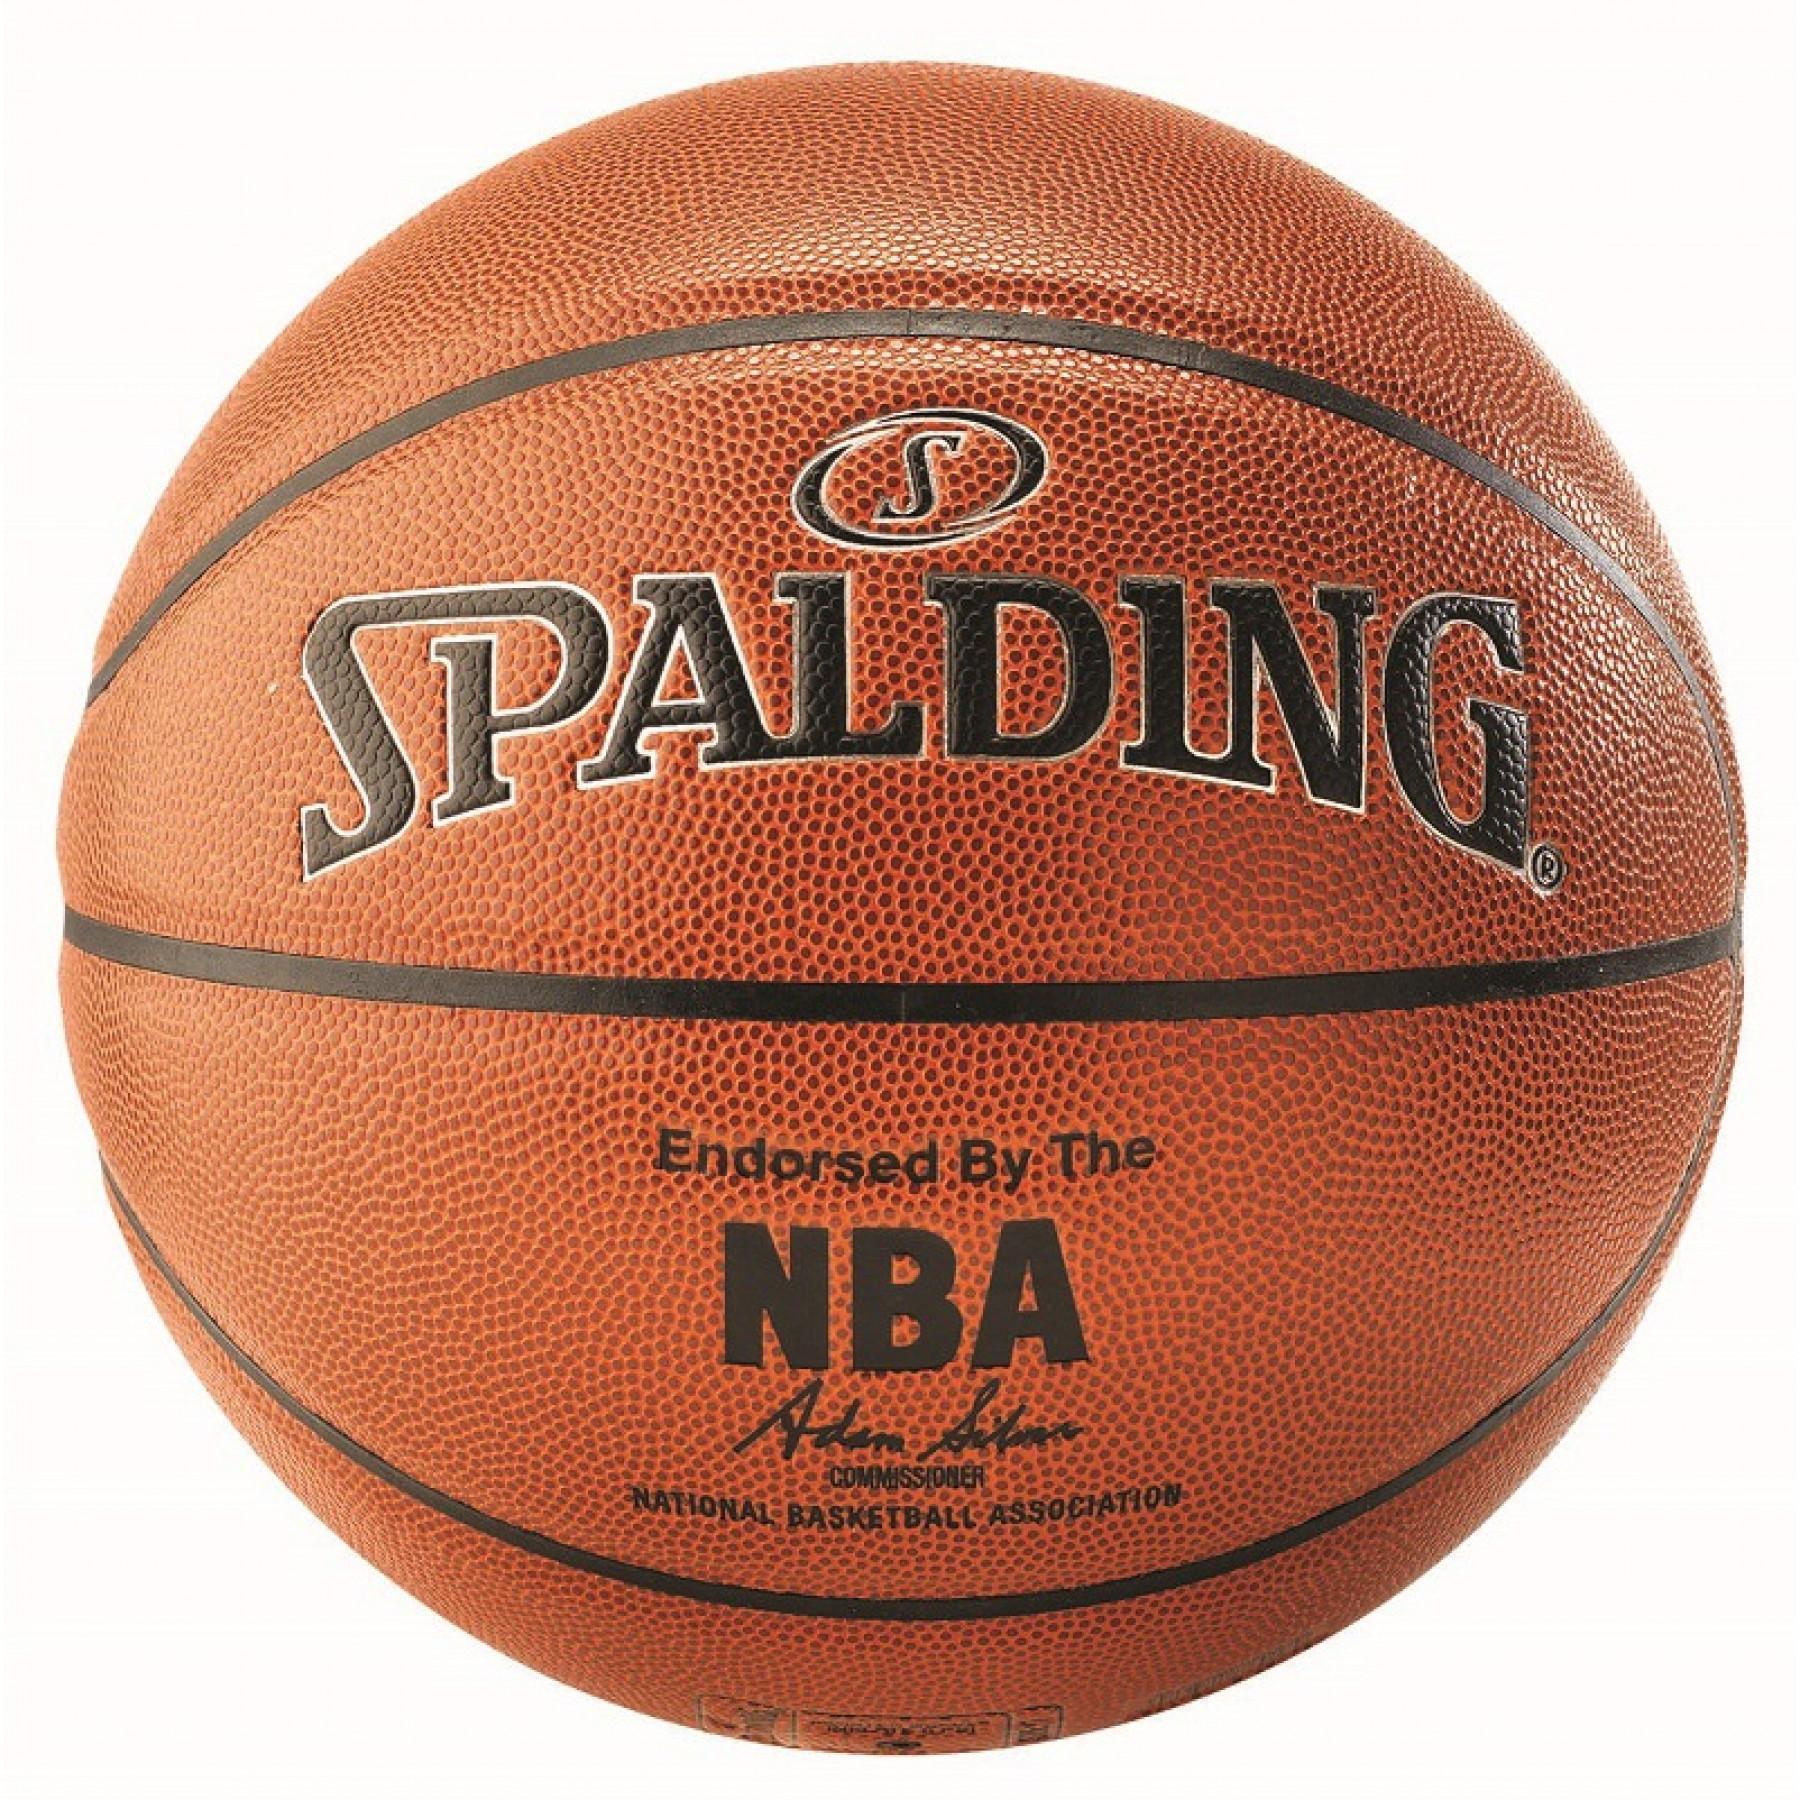 Globo Spalding Nba Silver In/Out